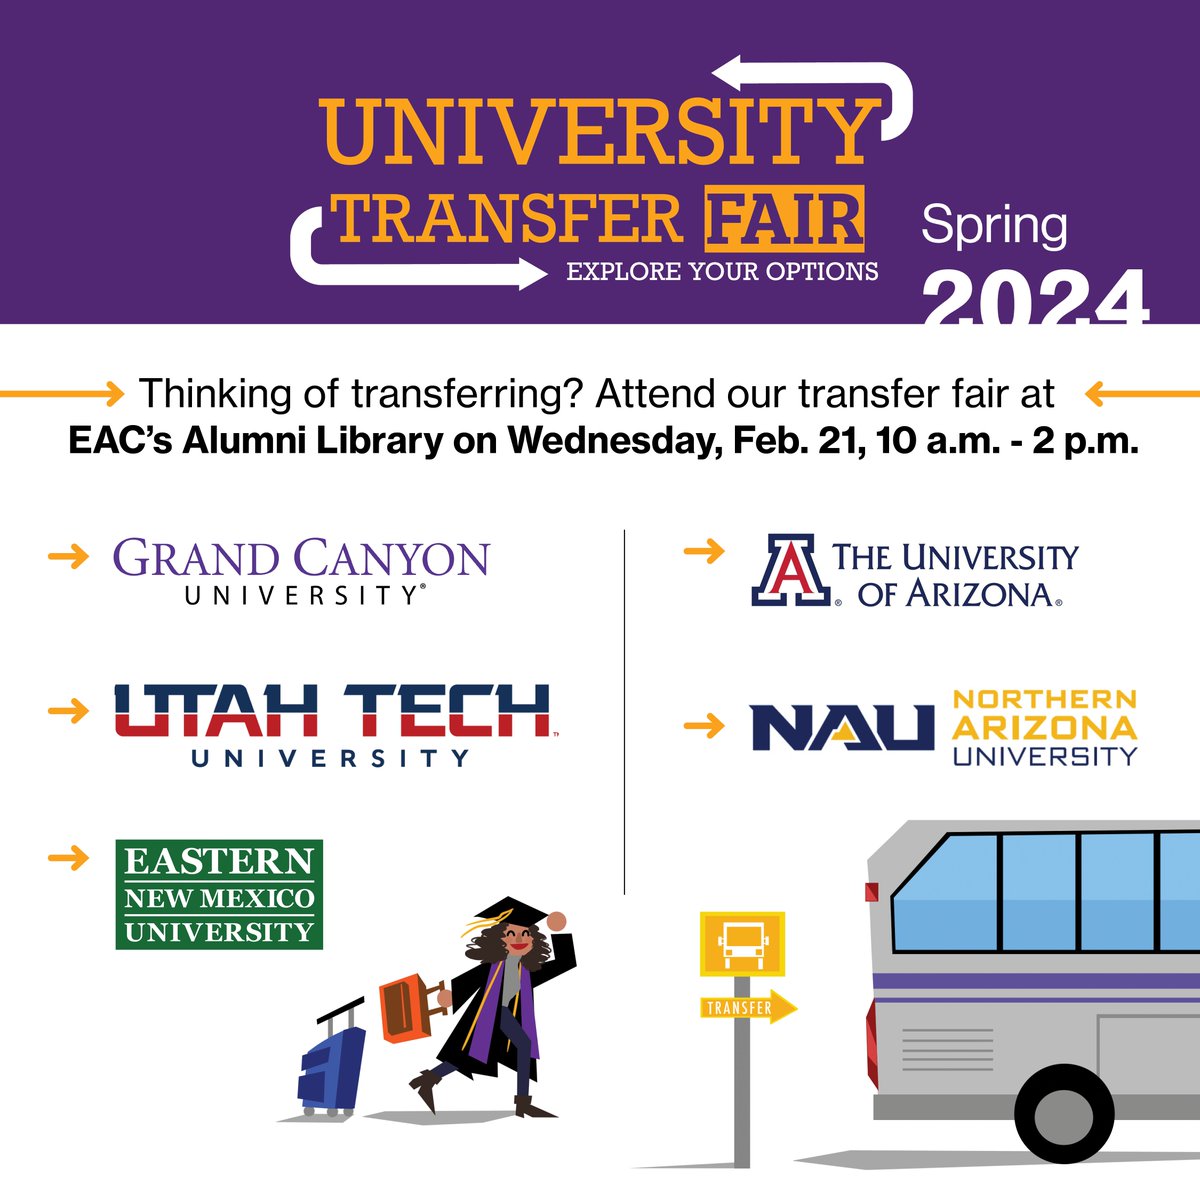 Students of EAC, don't miss out! Explore new horizons today at the University Transfer Fair at our library, from 10am - 2pm. Find your future! #EACTransferFair #ExploreColleges #TransferStudents